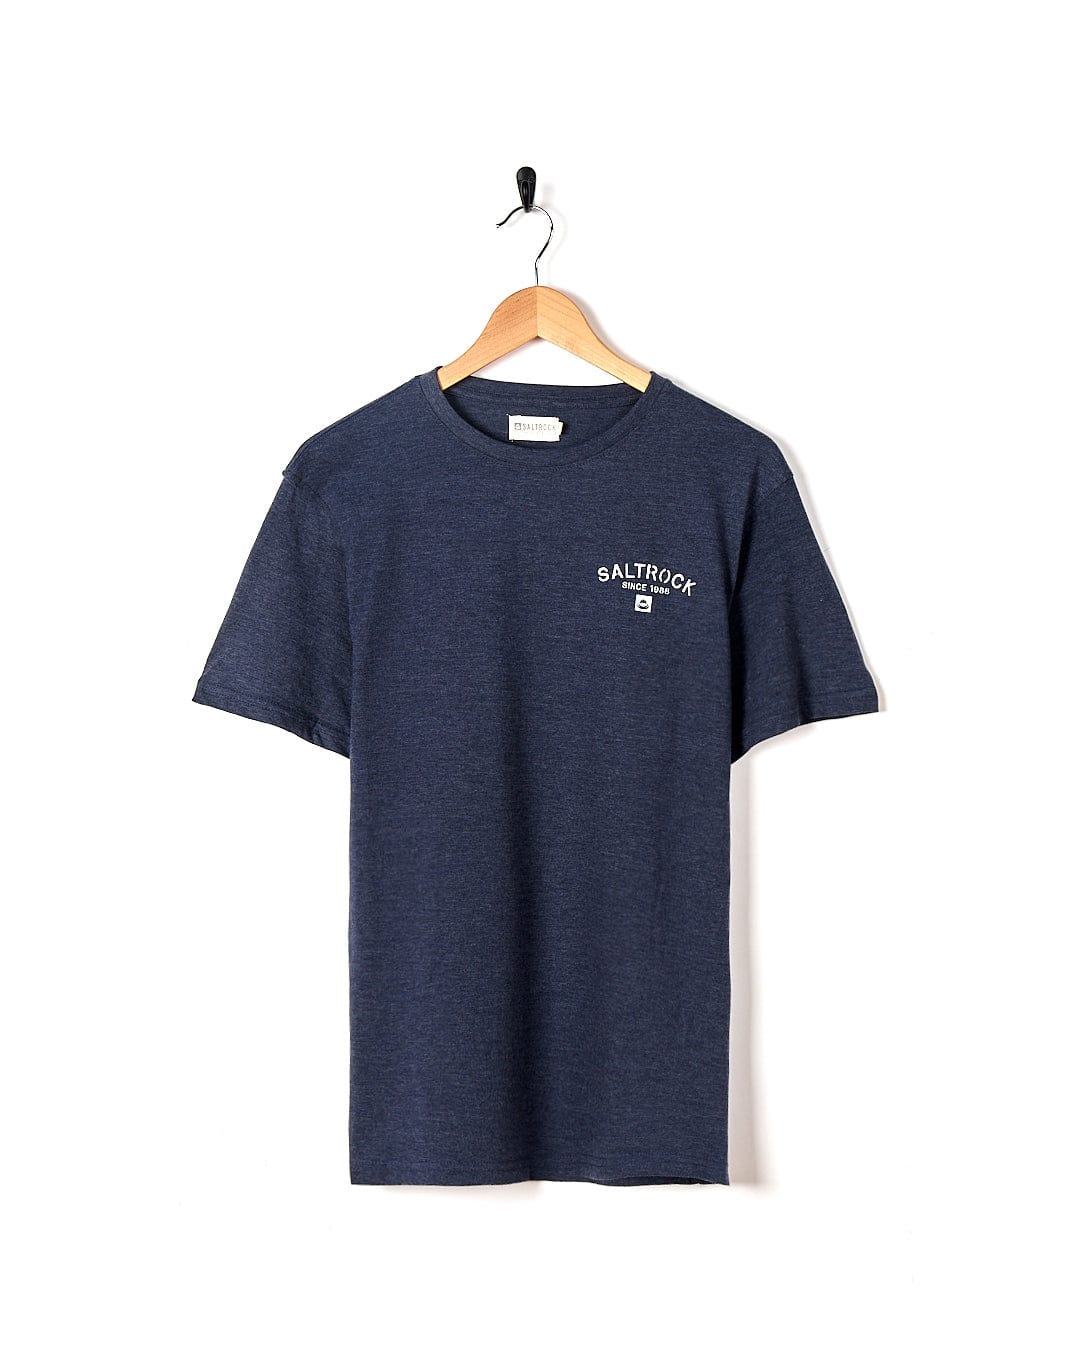 A Stencil - Mens Location T-Shirt in Swanage Blue with a white logo, perfect for casual wear from Saltrock.